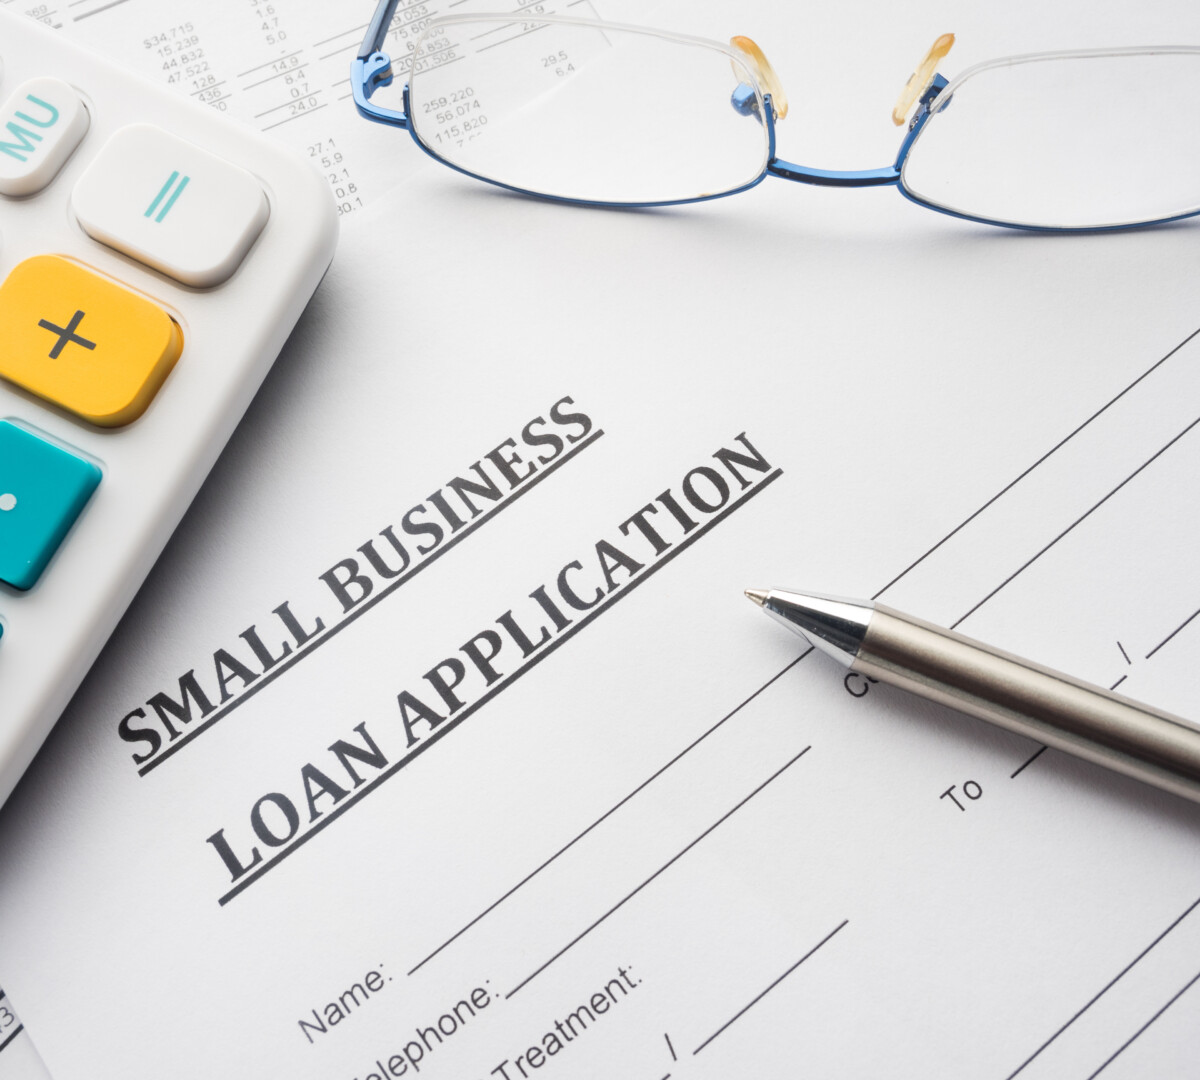 Small business loan application on a desk.